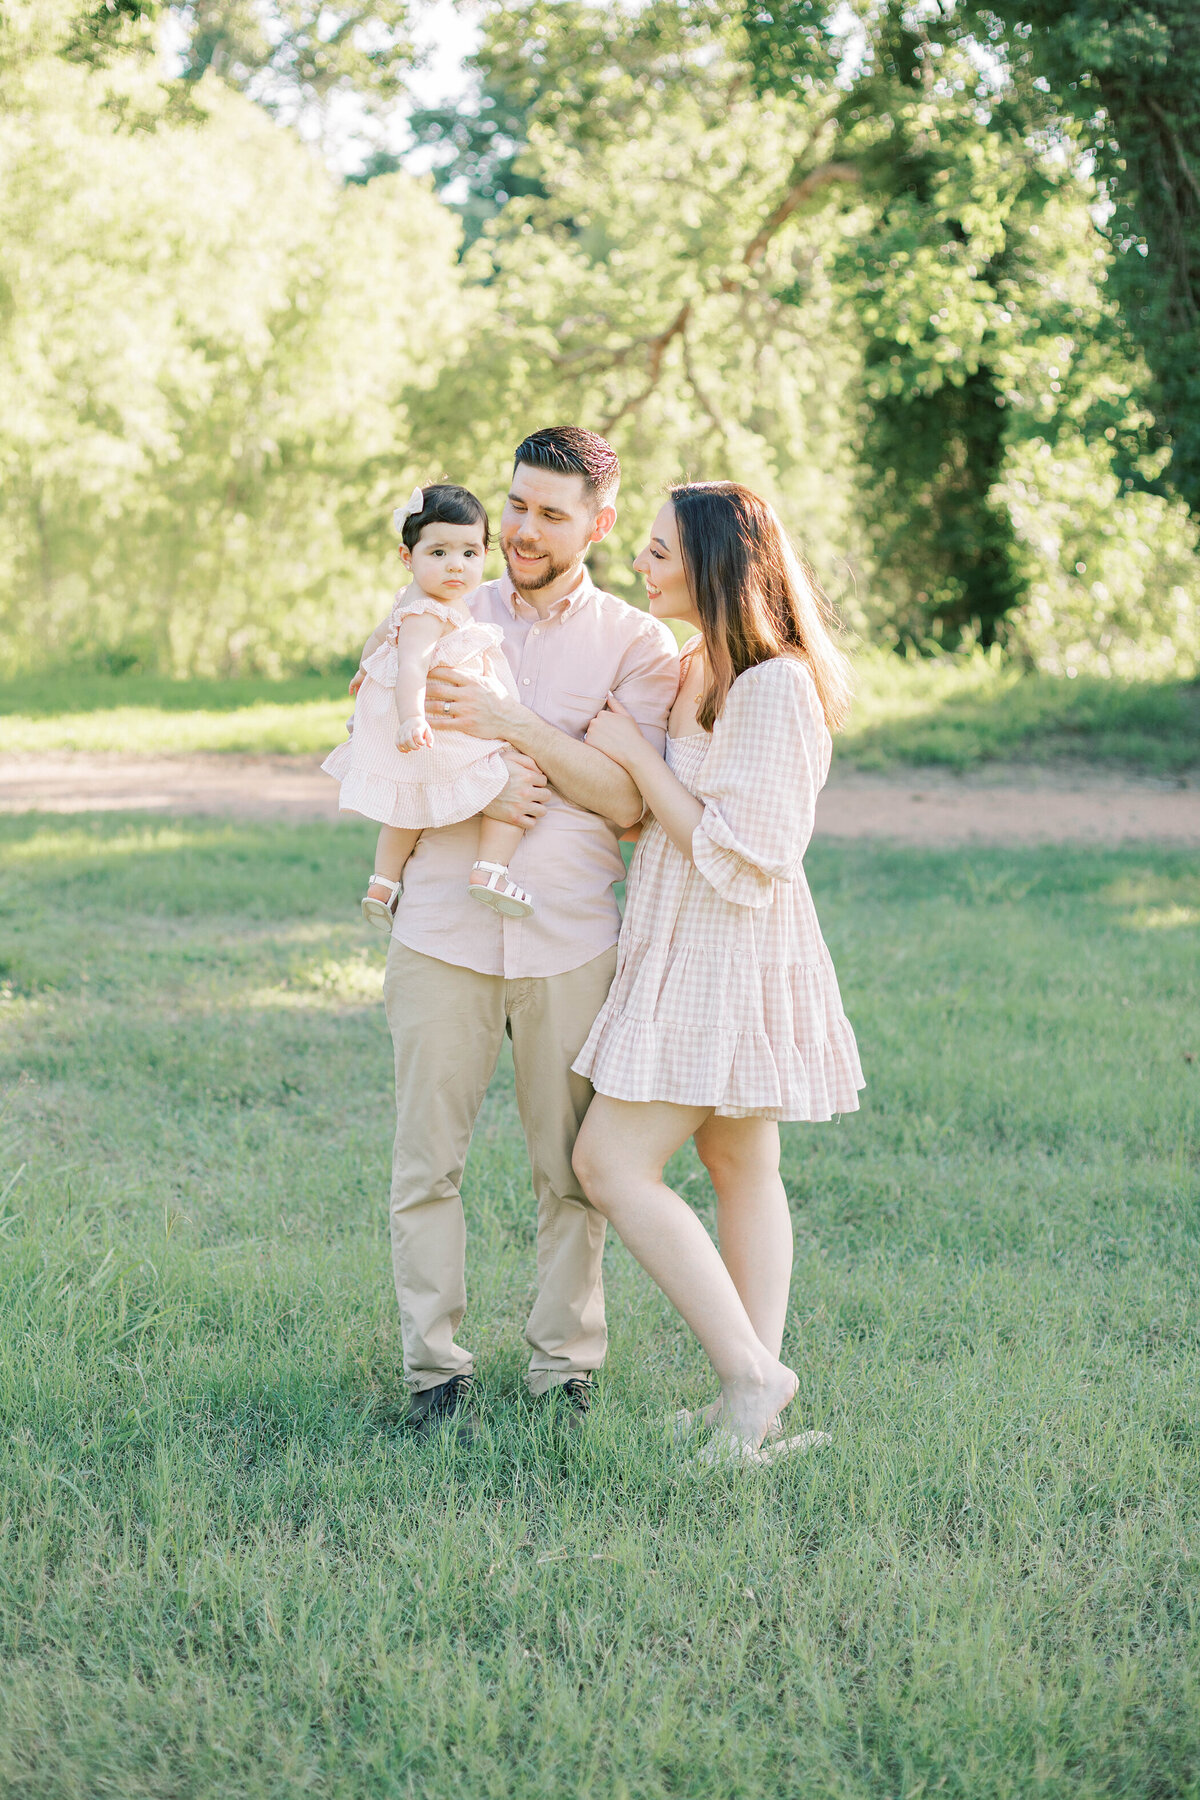 Portrait & Lifestyle Photography by Ink & Willow Photography | Victoria, TX